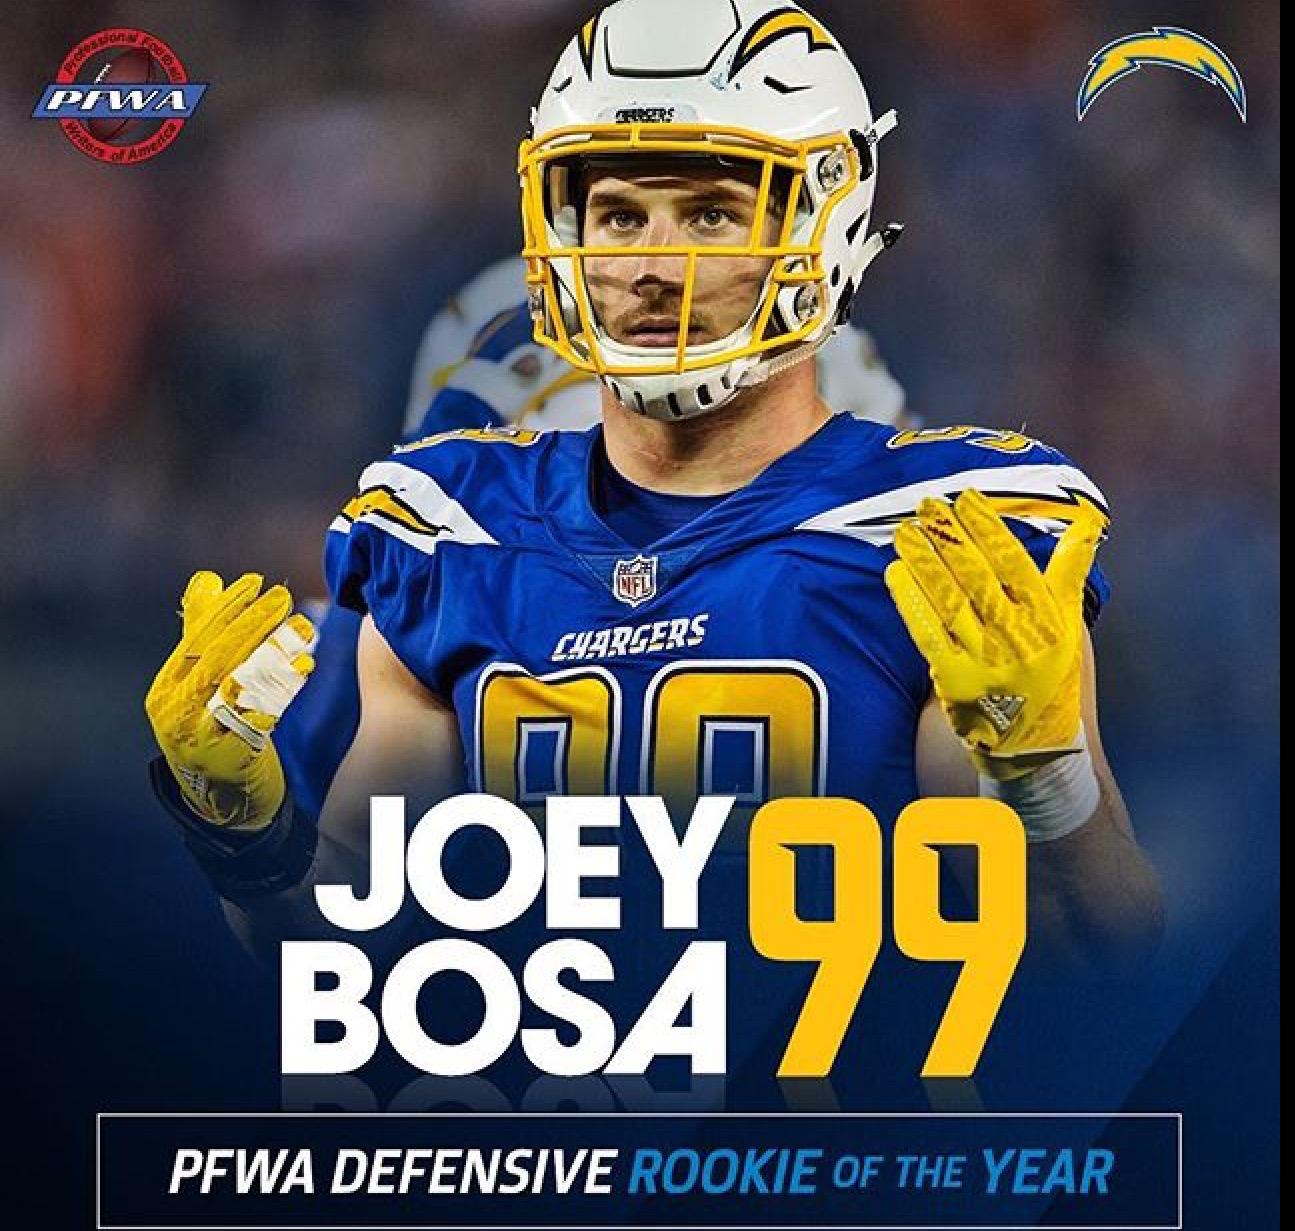 Joey Bosa 99 Los Angeles Chargers! ⚡. LA Chargers. Football